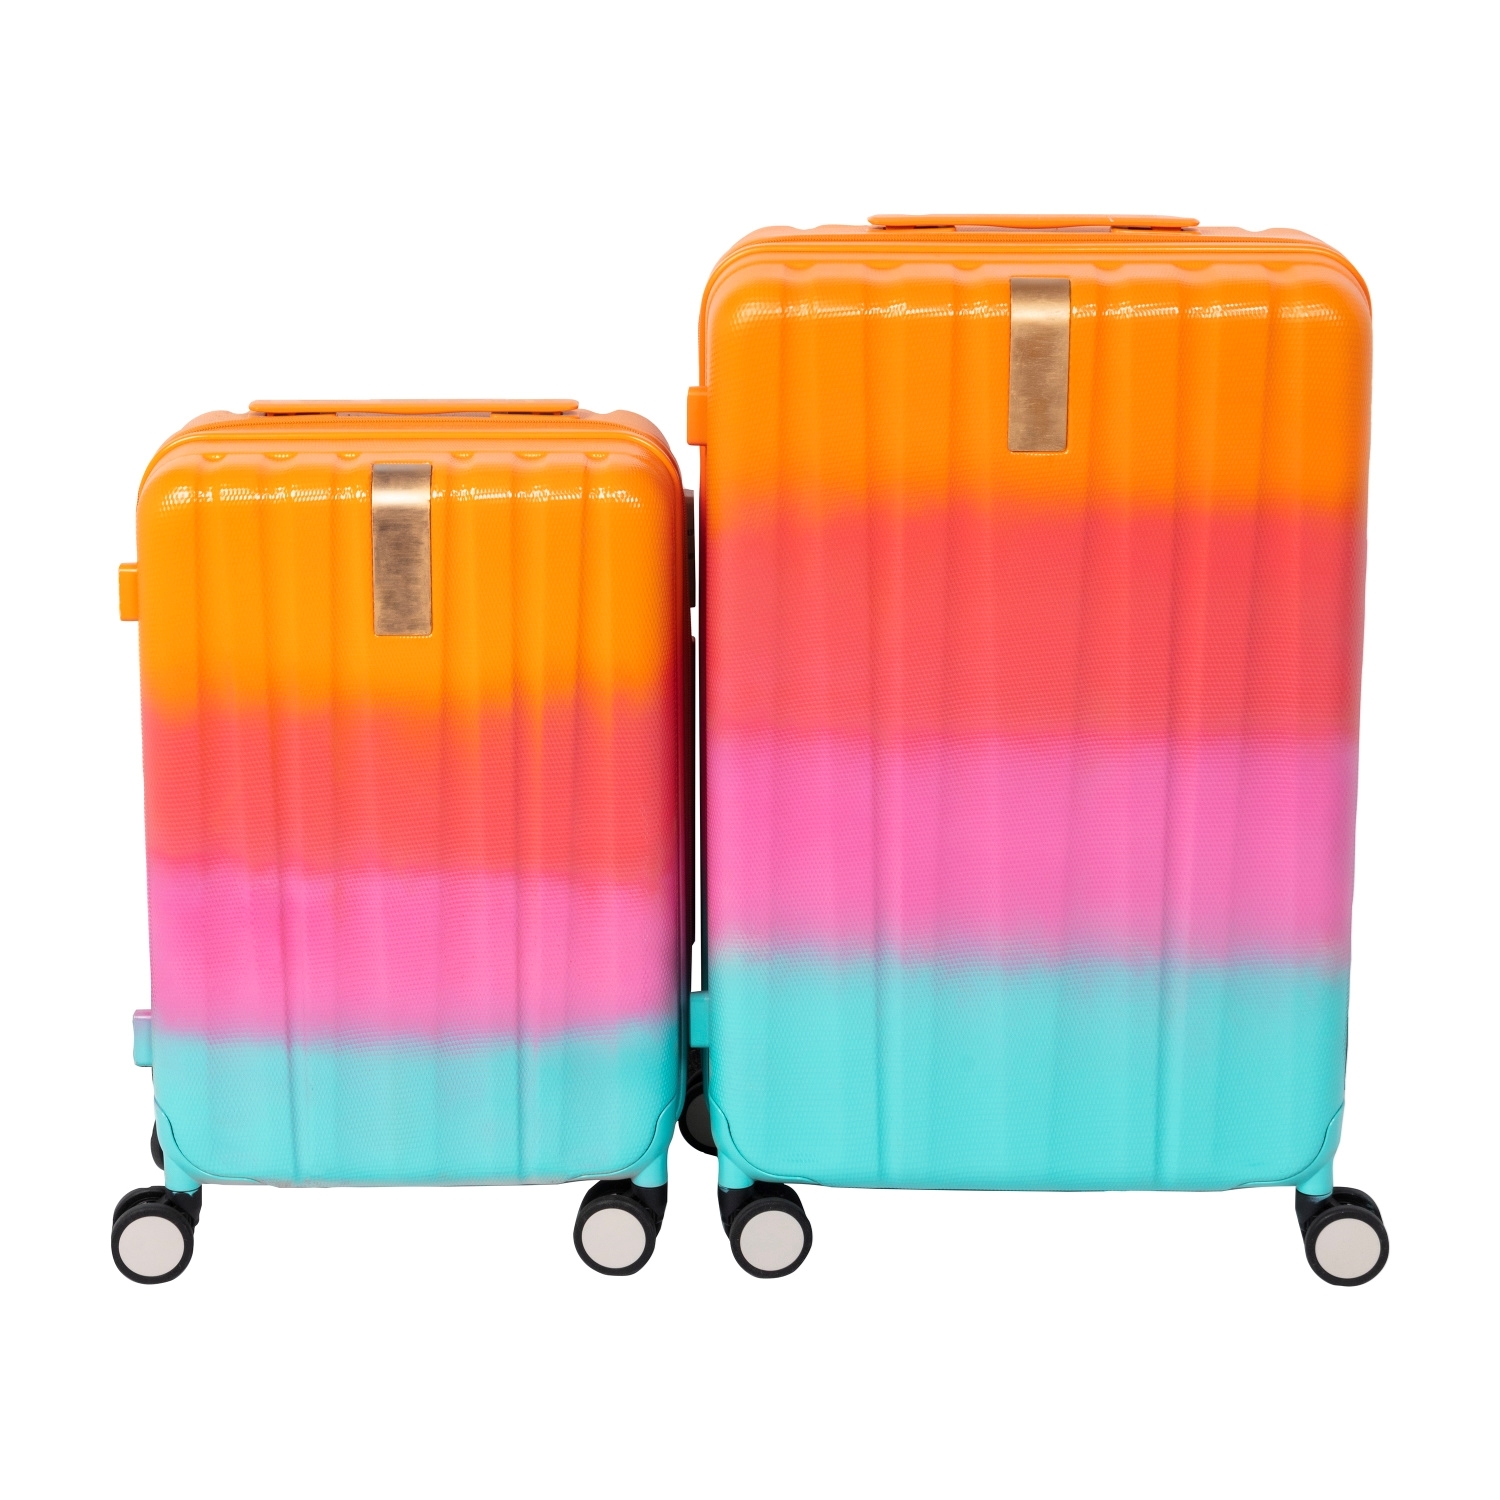 Personalized luggage makeover with COLORSHOT